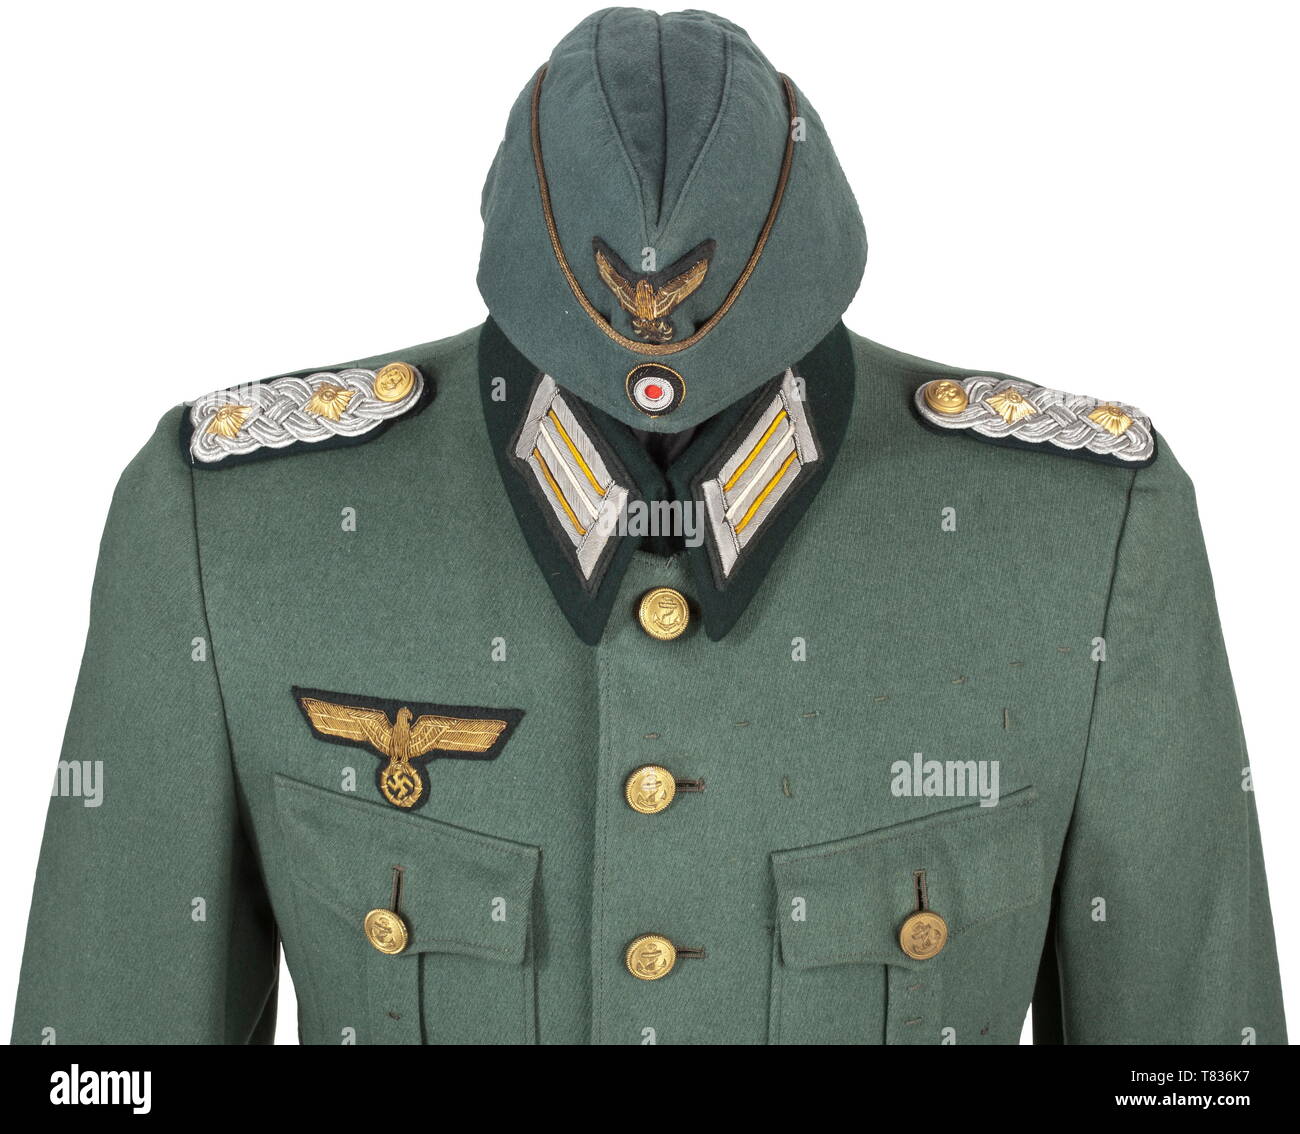 A field cap and a tunic for a Kapitän zur See in the coast artillery Garrison cap of field-grey cotton material with gold piping and hand-embroidered insignia. Grey silk inner lining with obvious signs of usage, no maker, size ca. 56. The jacket of grey-green cotton cloth with hand-embroidered insignia. Slip-on shoulder boards in the rank of Kapitän zur See (naval captain), orders loops on both sides of the chest for the German Cross in Gold and the Iron Cross 1st Class with Repetition Clasp, field orders clasp and other decorations. Dark grey inner lining without maker des, Editorial-Use-Only Stock Photo